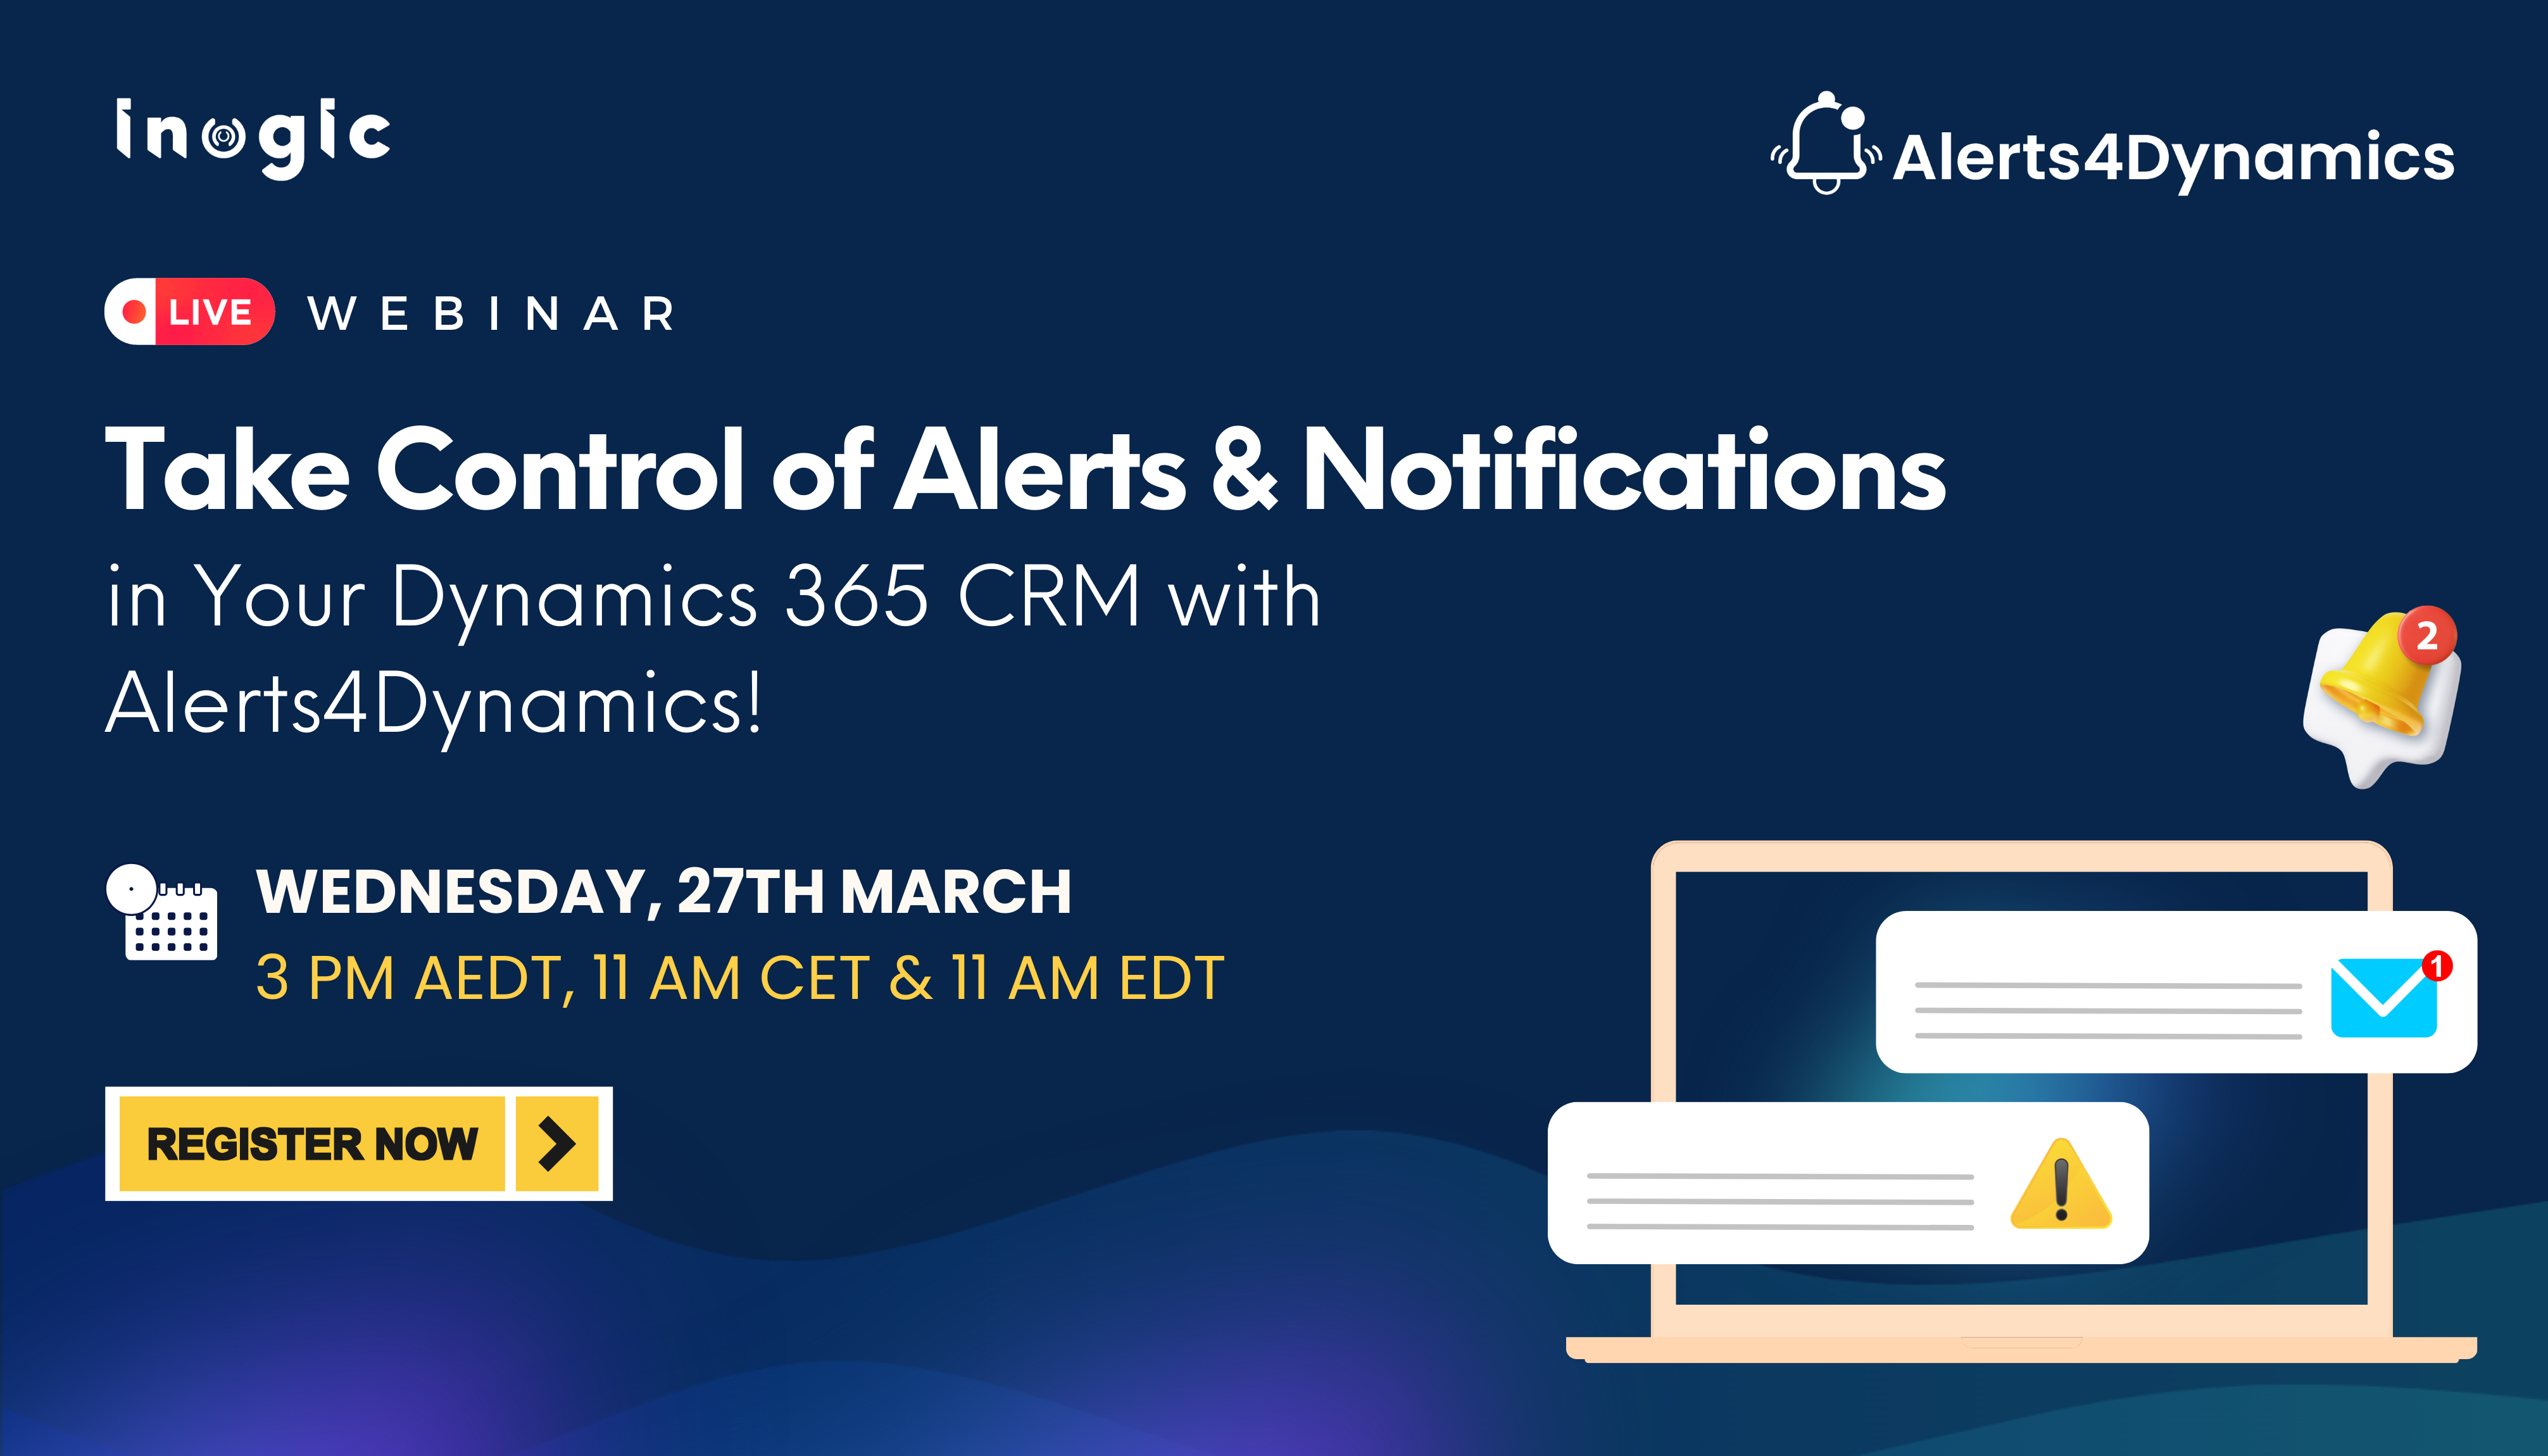 Webinar: Take Control of Alerts & Notifications in Your Dynamics 365 CRM with Alerts4Dynamics!